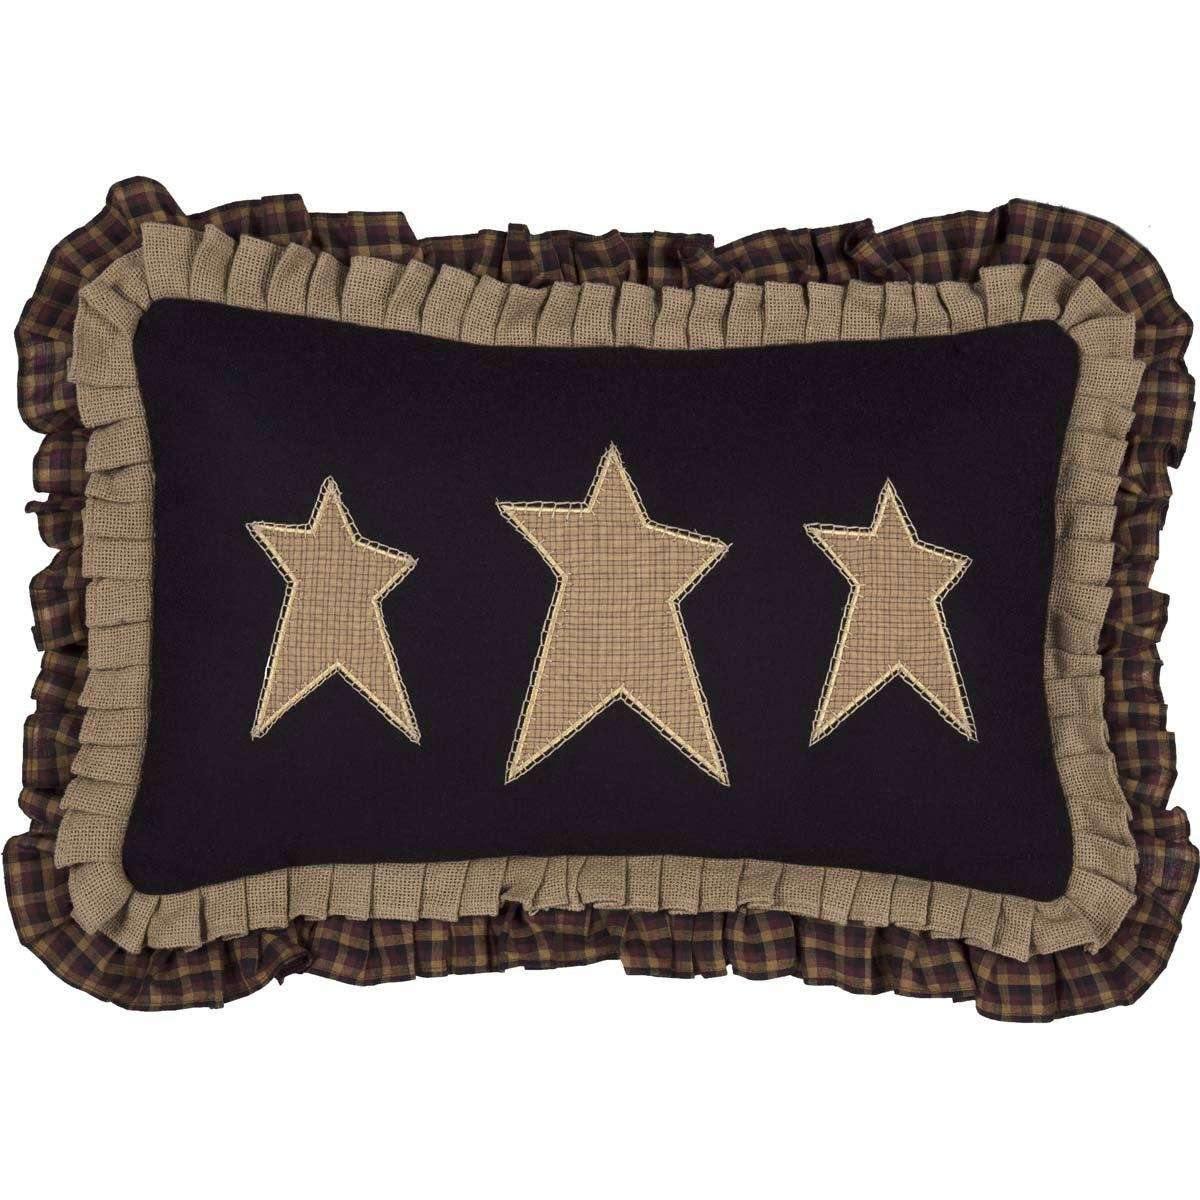 Heritage Farms Primitive Stars Pillow 14x22 VHC Brands front